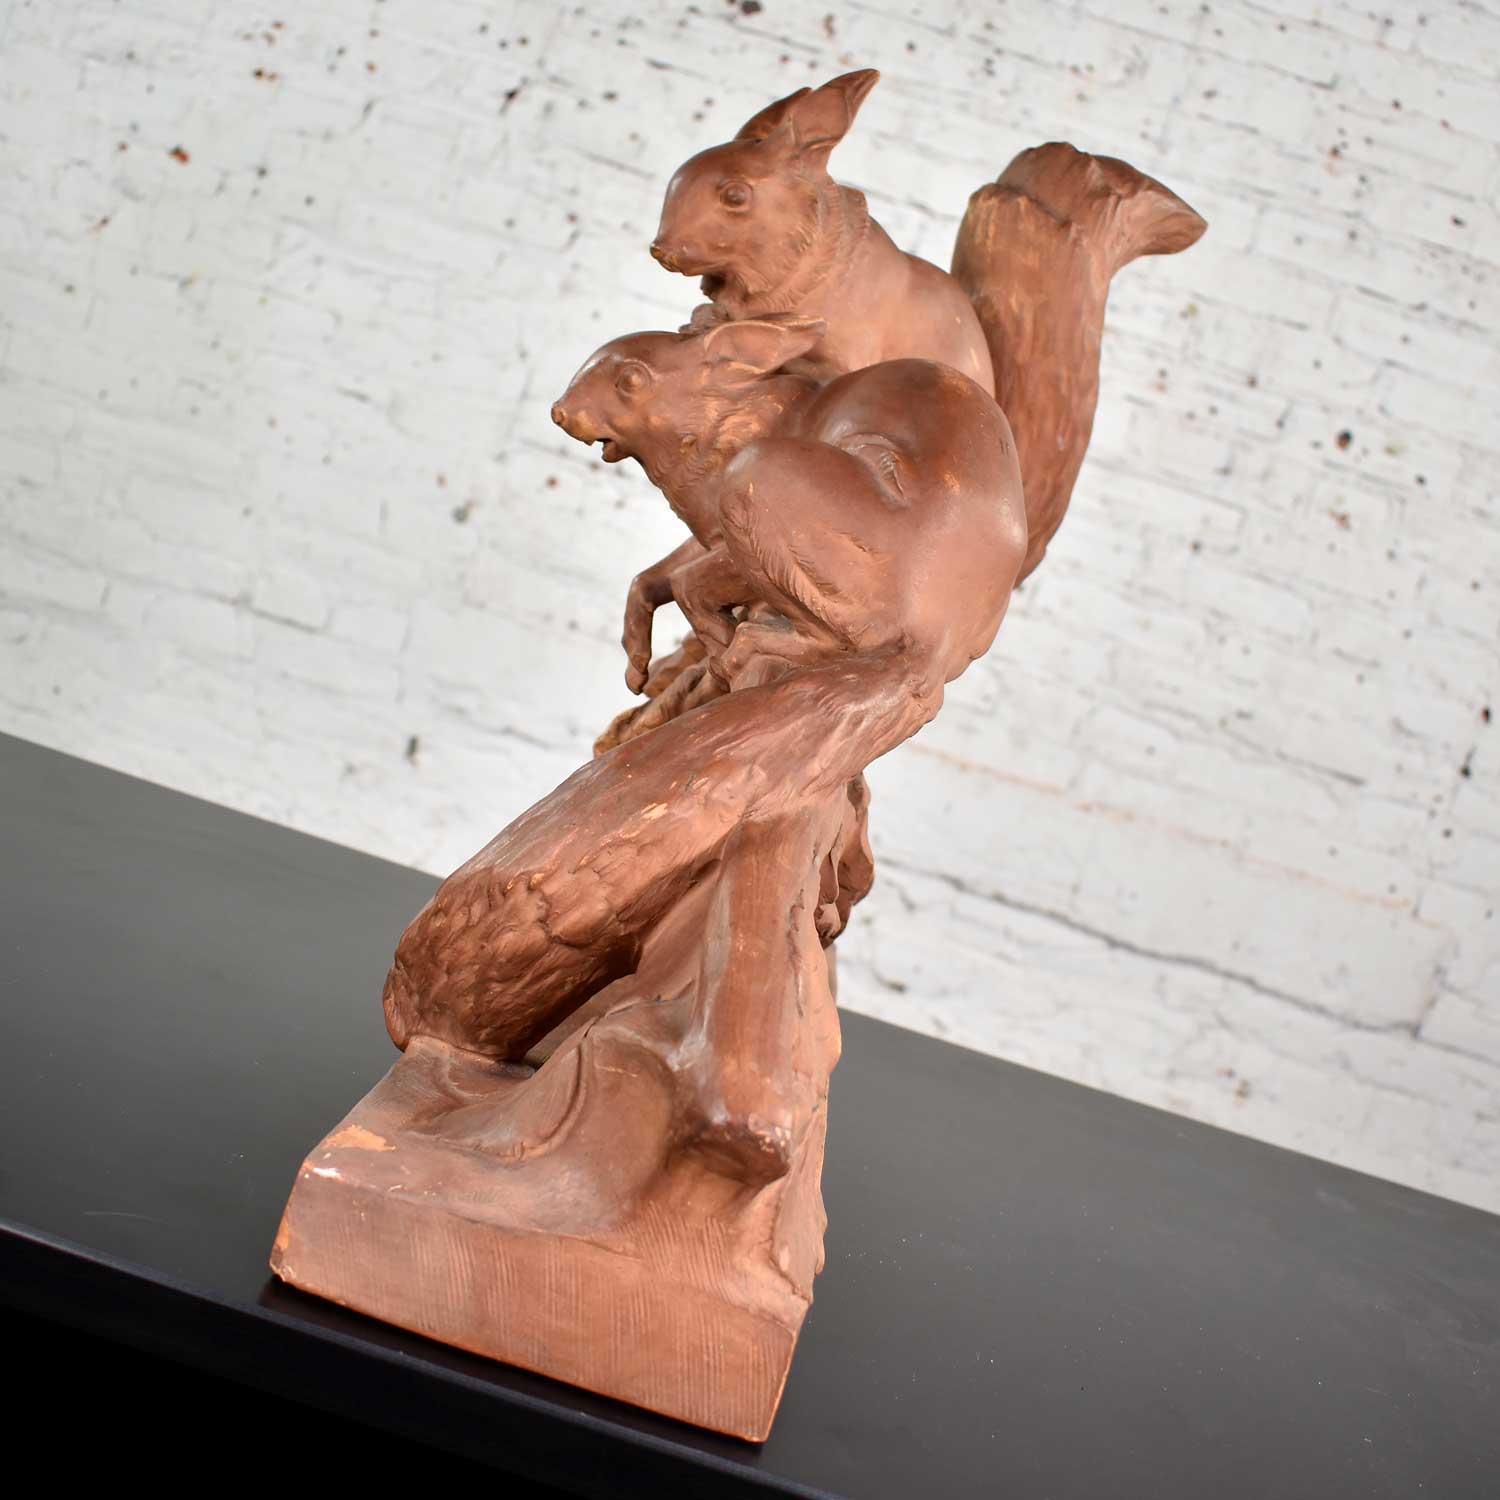 Antique Terracotta Lifesize Sculpture of Squirrels by Leo Amaury & Stamped R D’Arly France